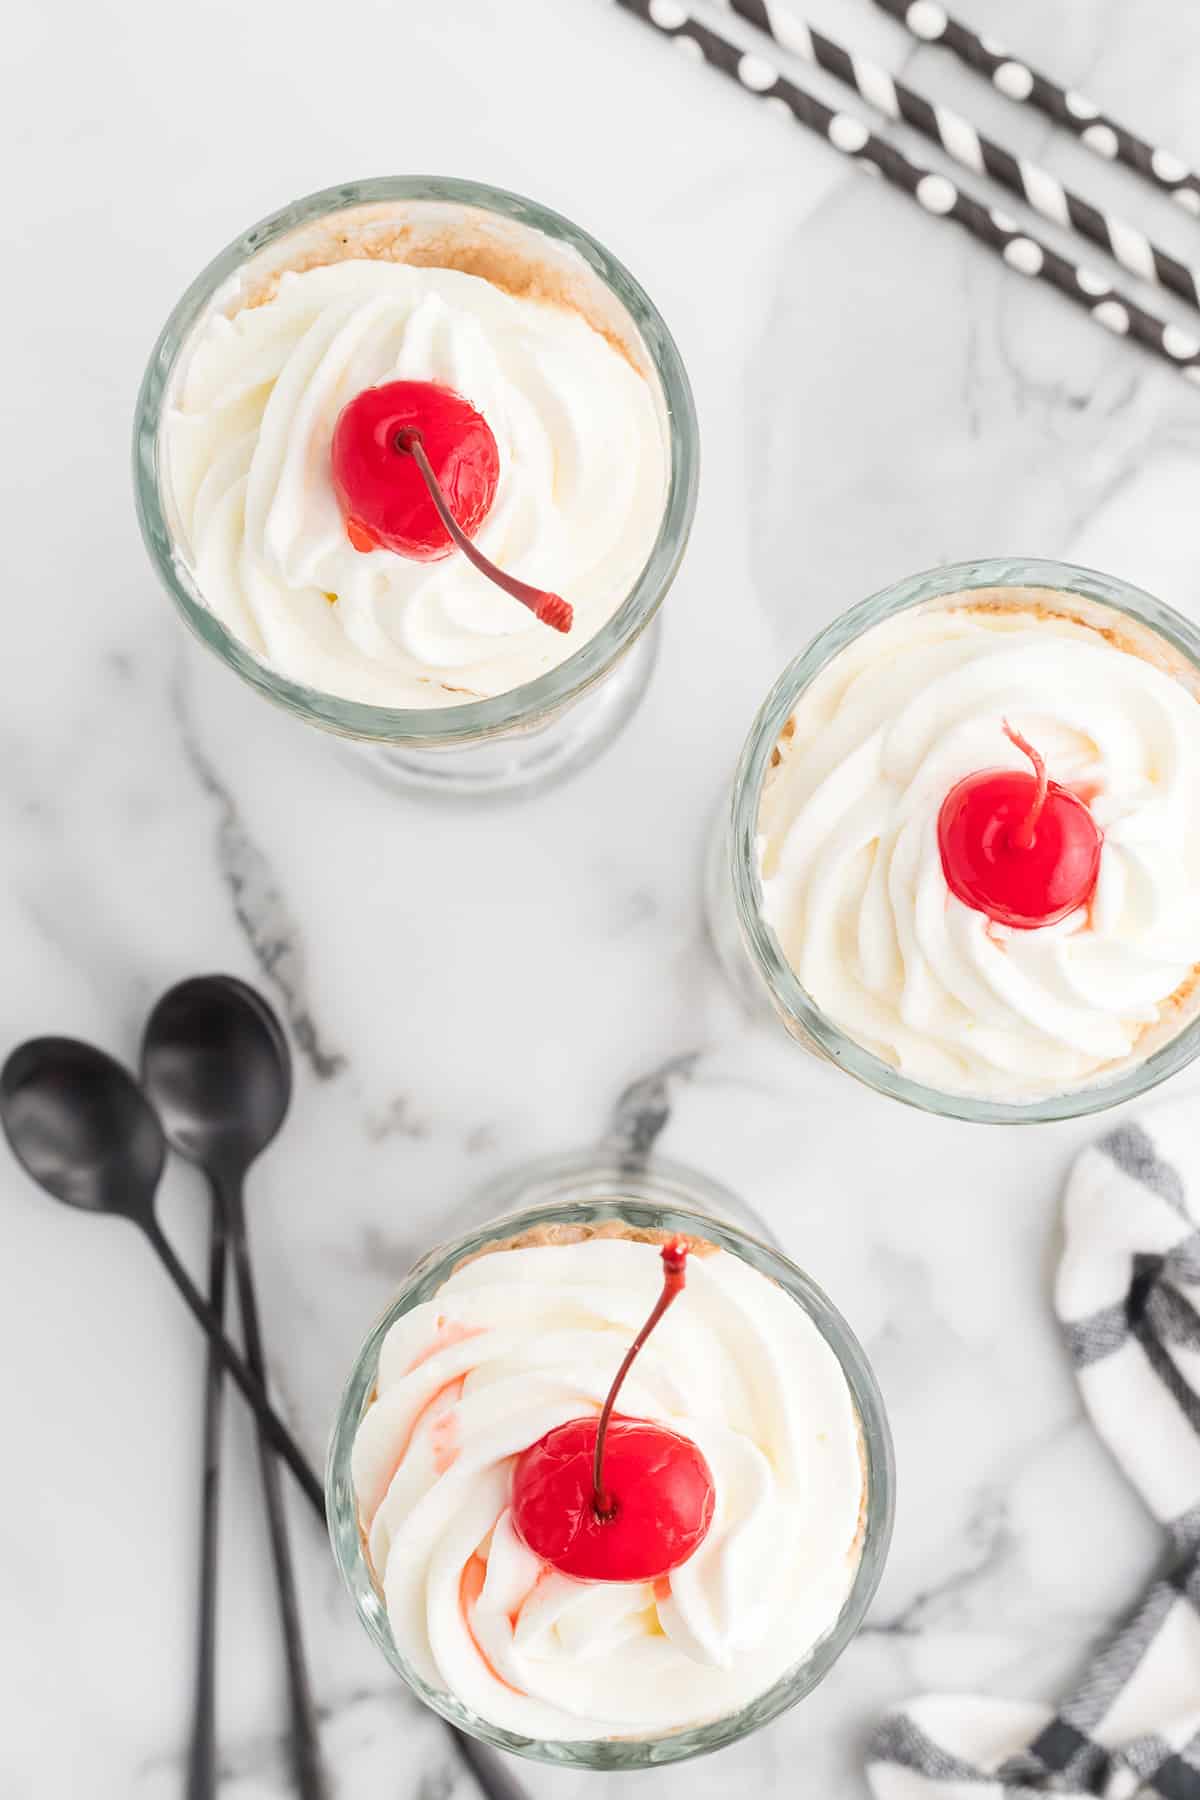 Floats topped with whipped cream and cherries.